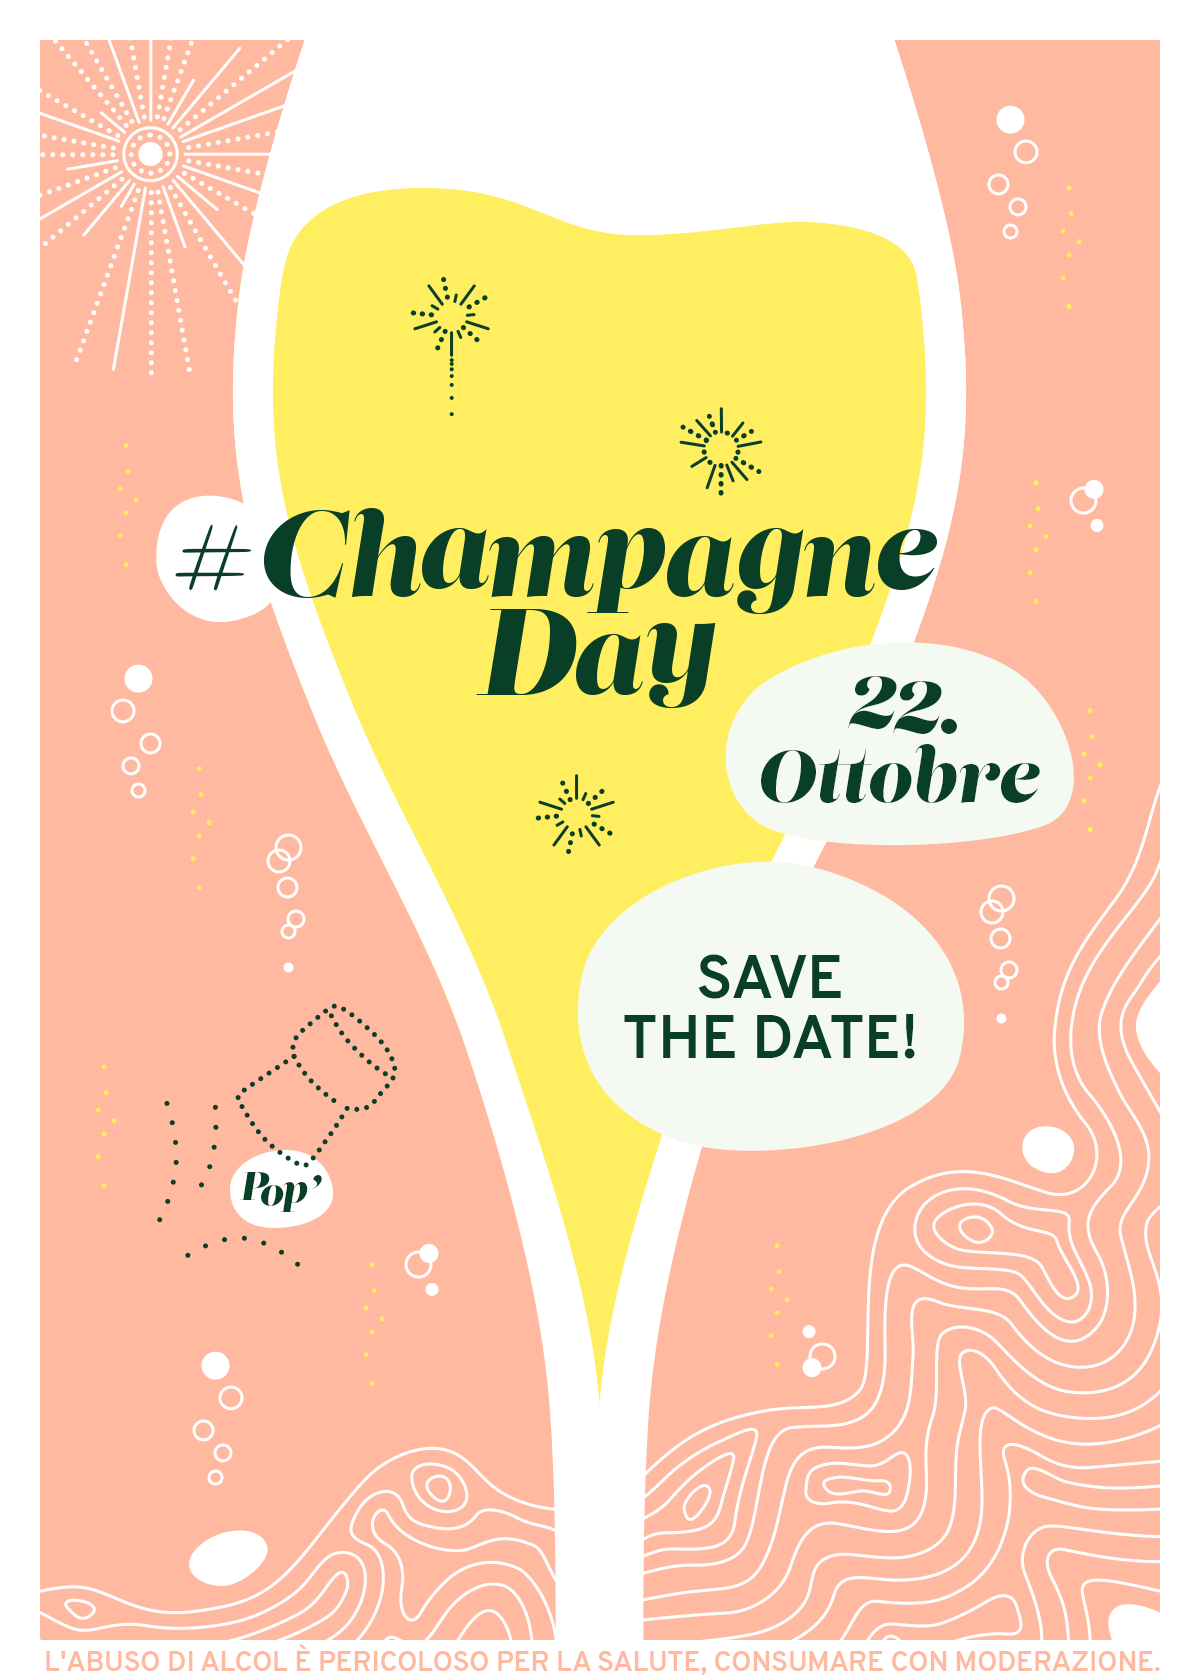 Champagne-day